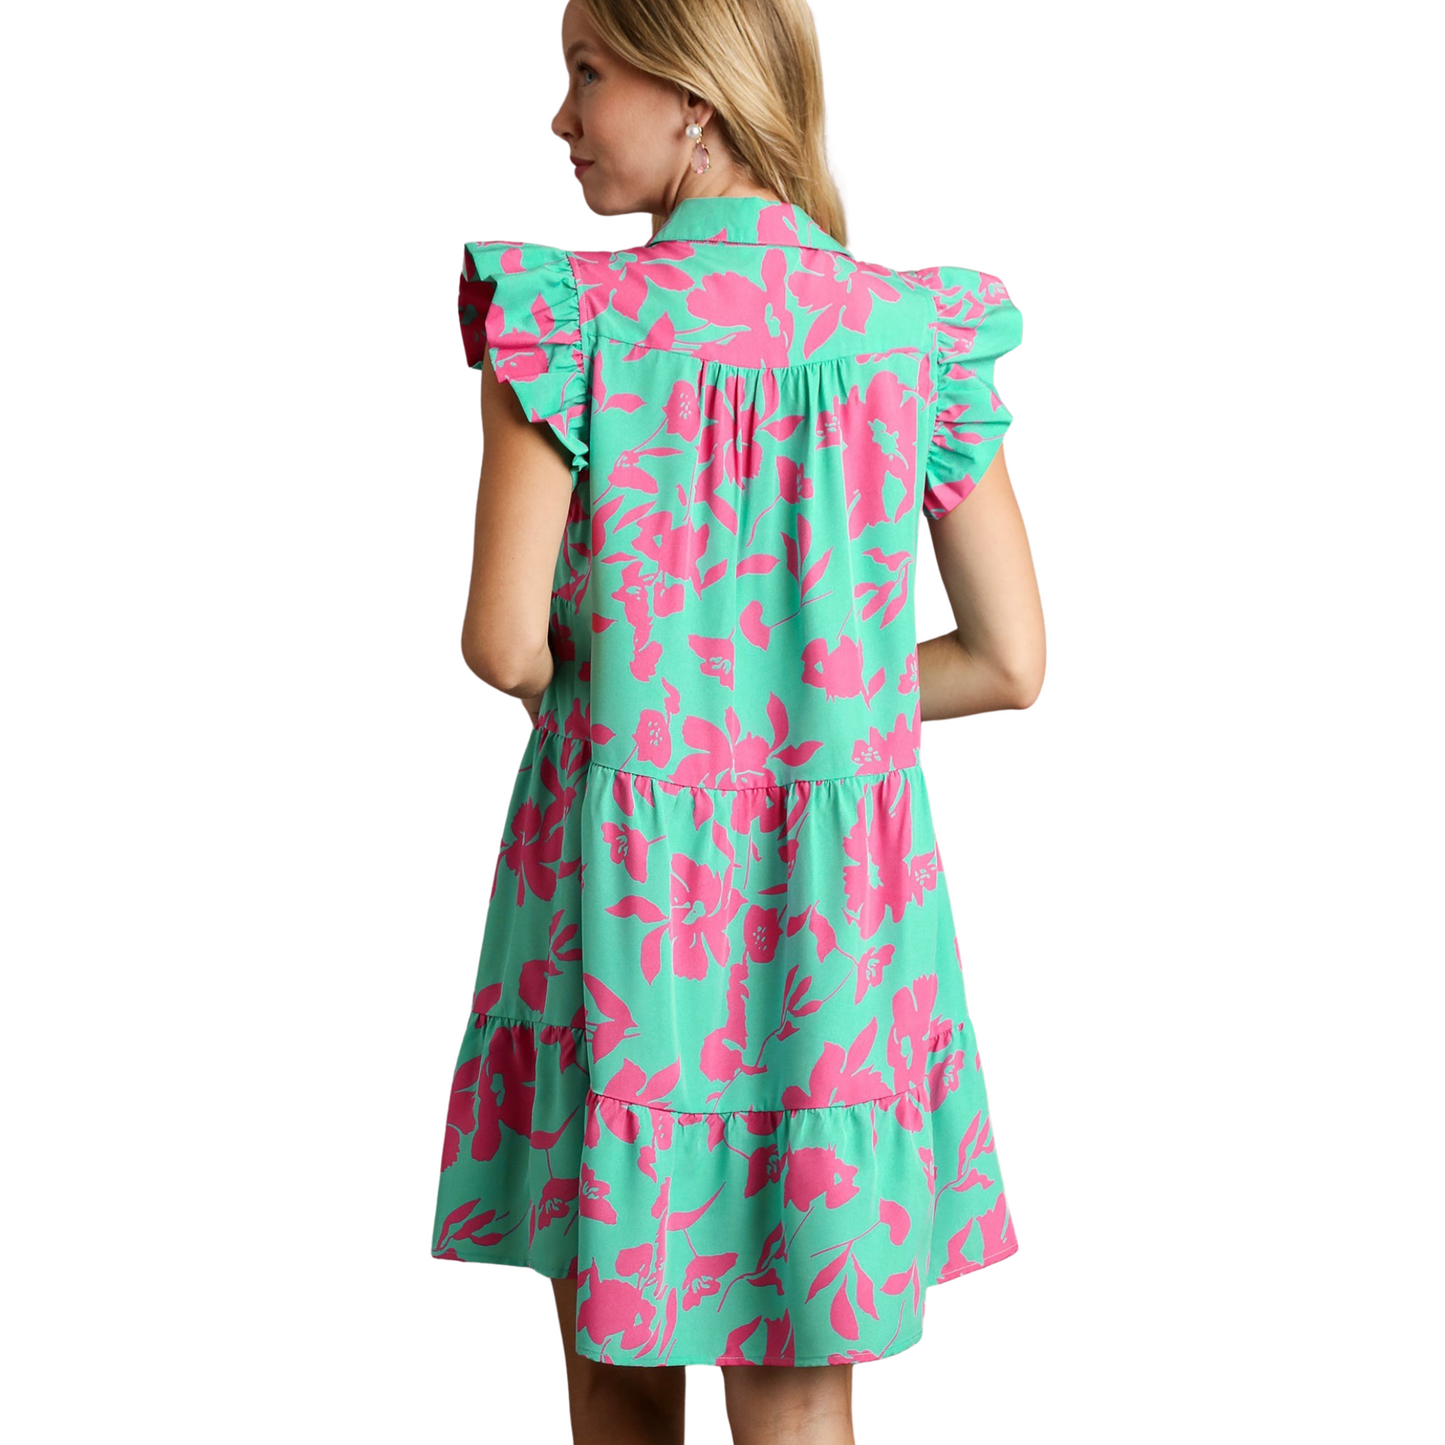 Experience the perfect blend of elegant and playful with our Floral Print Collared Dress. The feminine floral print, v-neckline, and flutter sleeves add a touch of romance, while the tiered design and mini length give it a modern twist. Make a statement with this collared dress for any occasion.